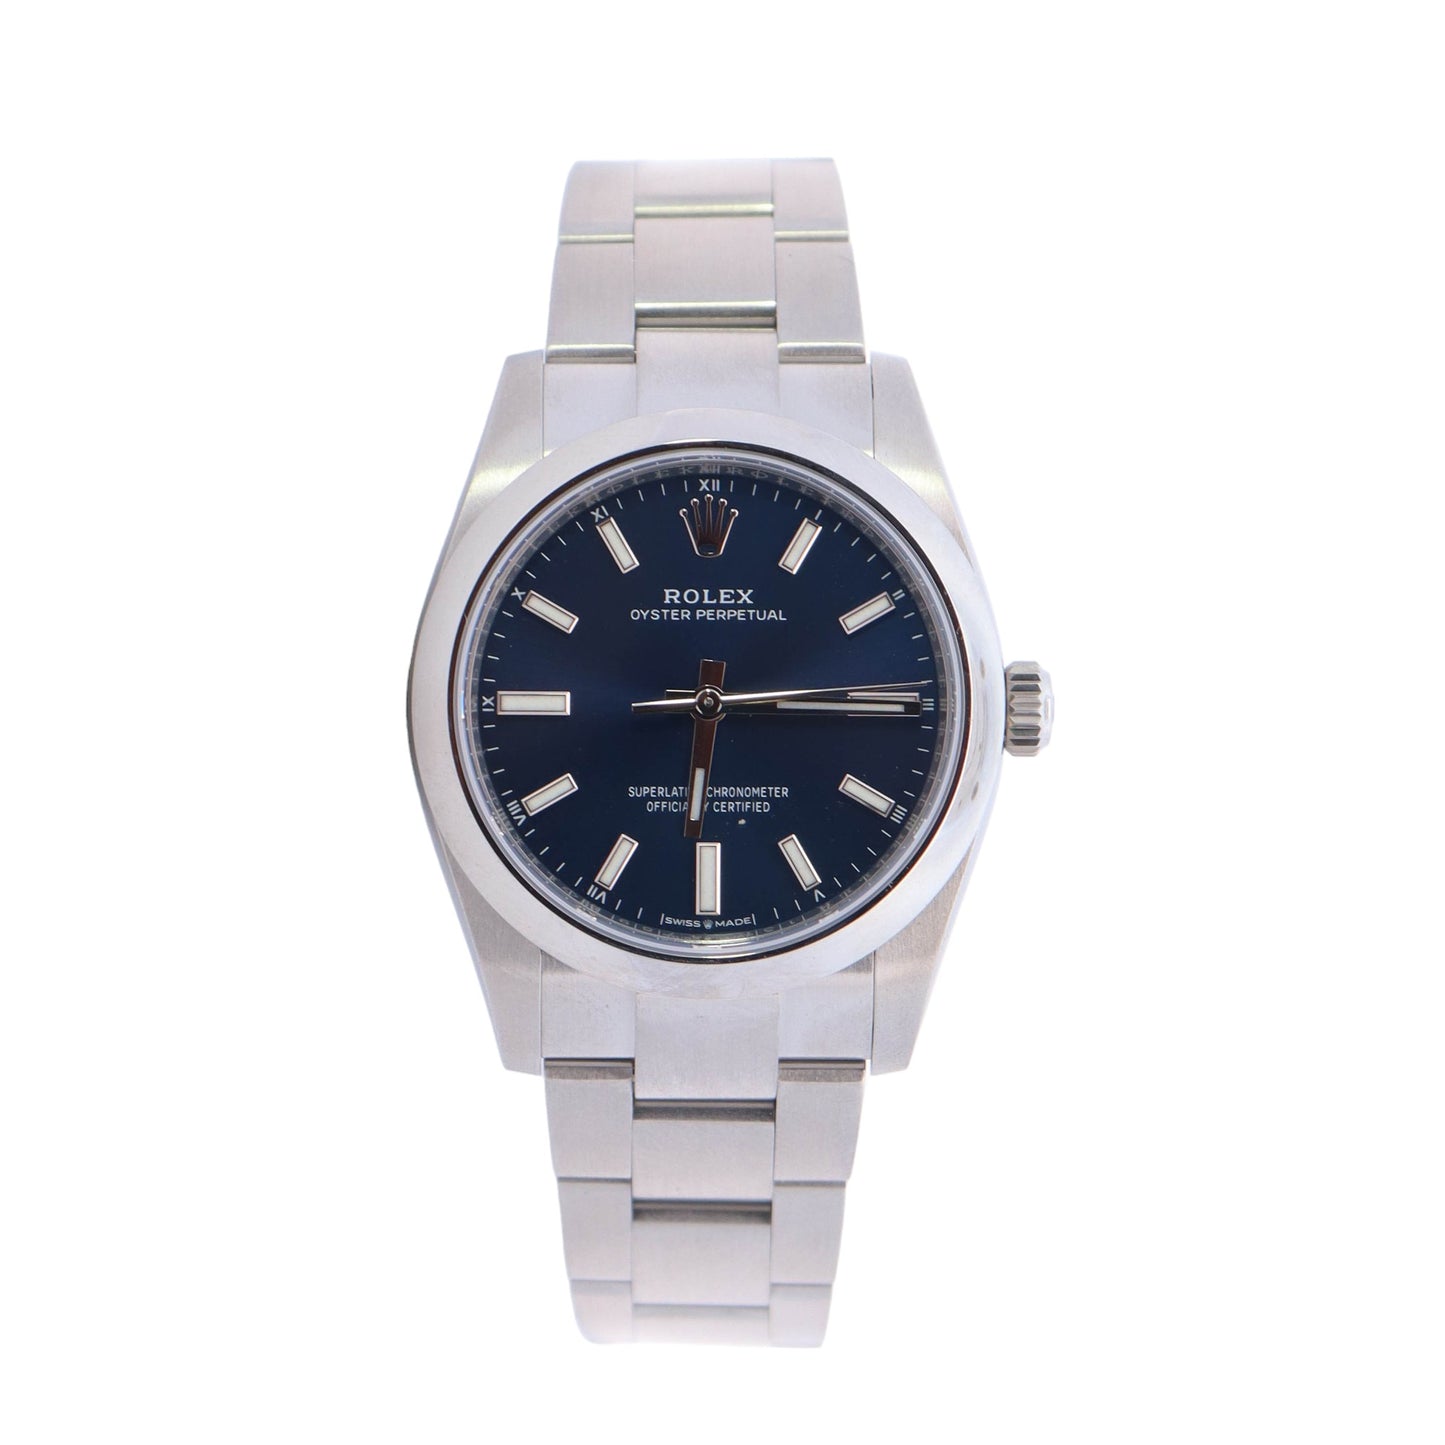 Rolex Oyster Perpetual Stainless Steel 34mm Blue Stick Dial Watch Reference #: 124200 - Happy Jewelers Fine Jewelry Lifetime Warranty